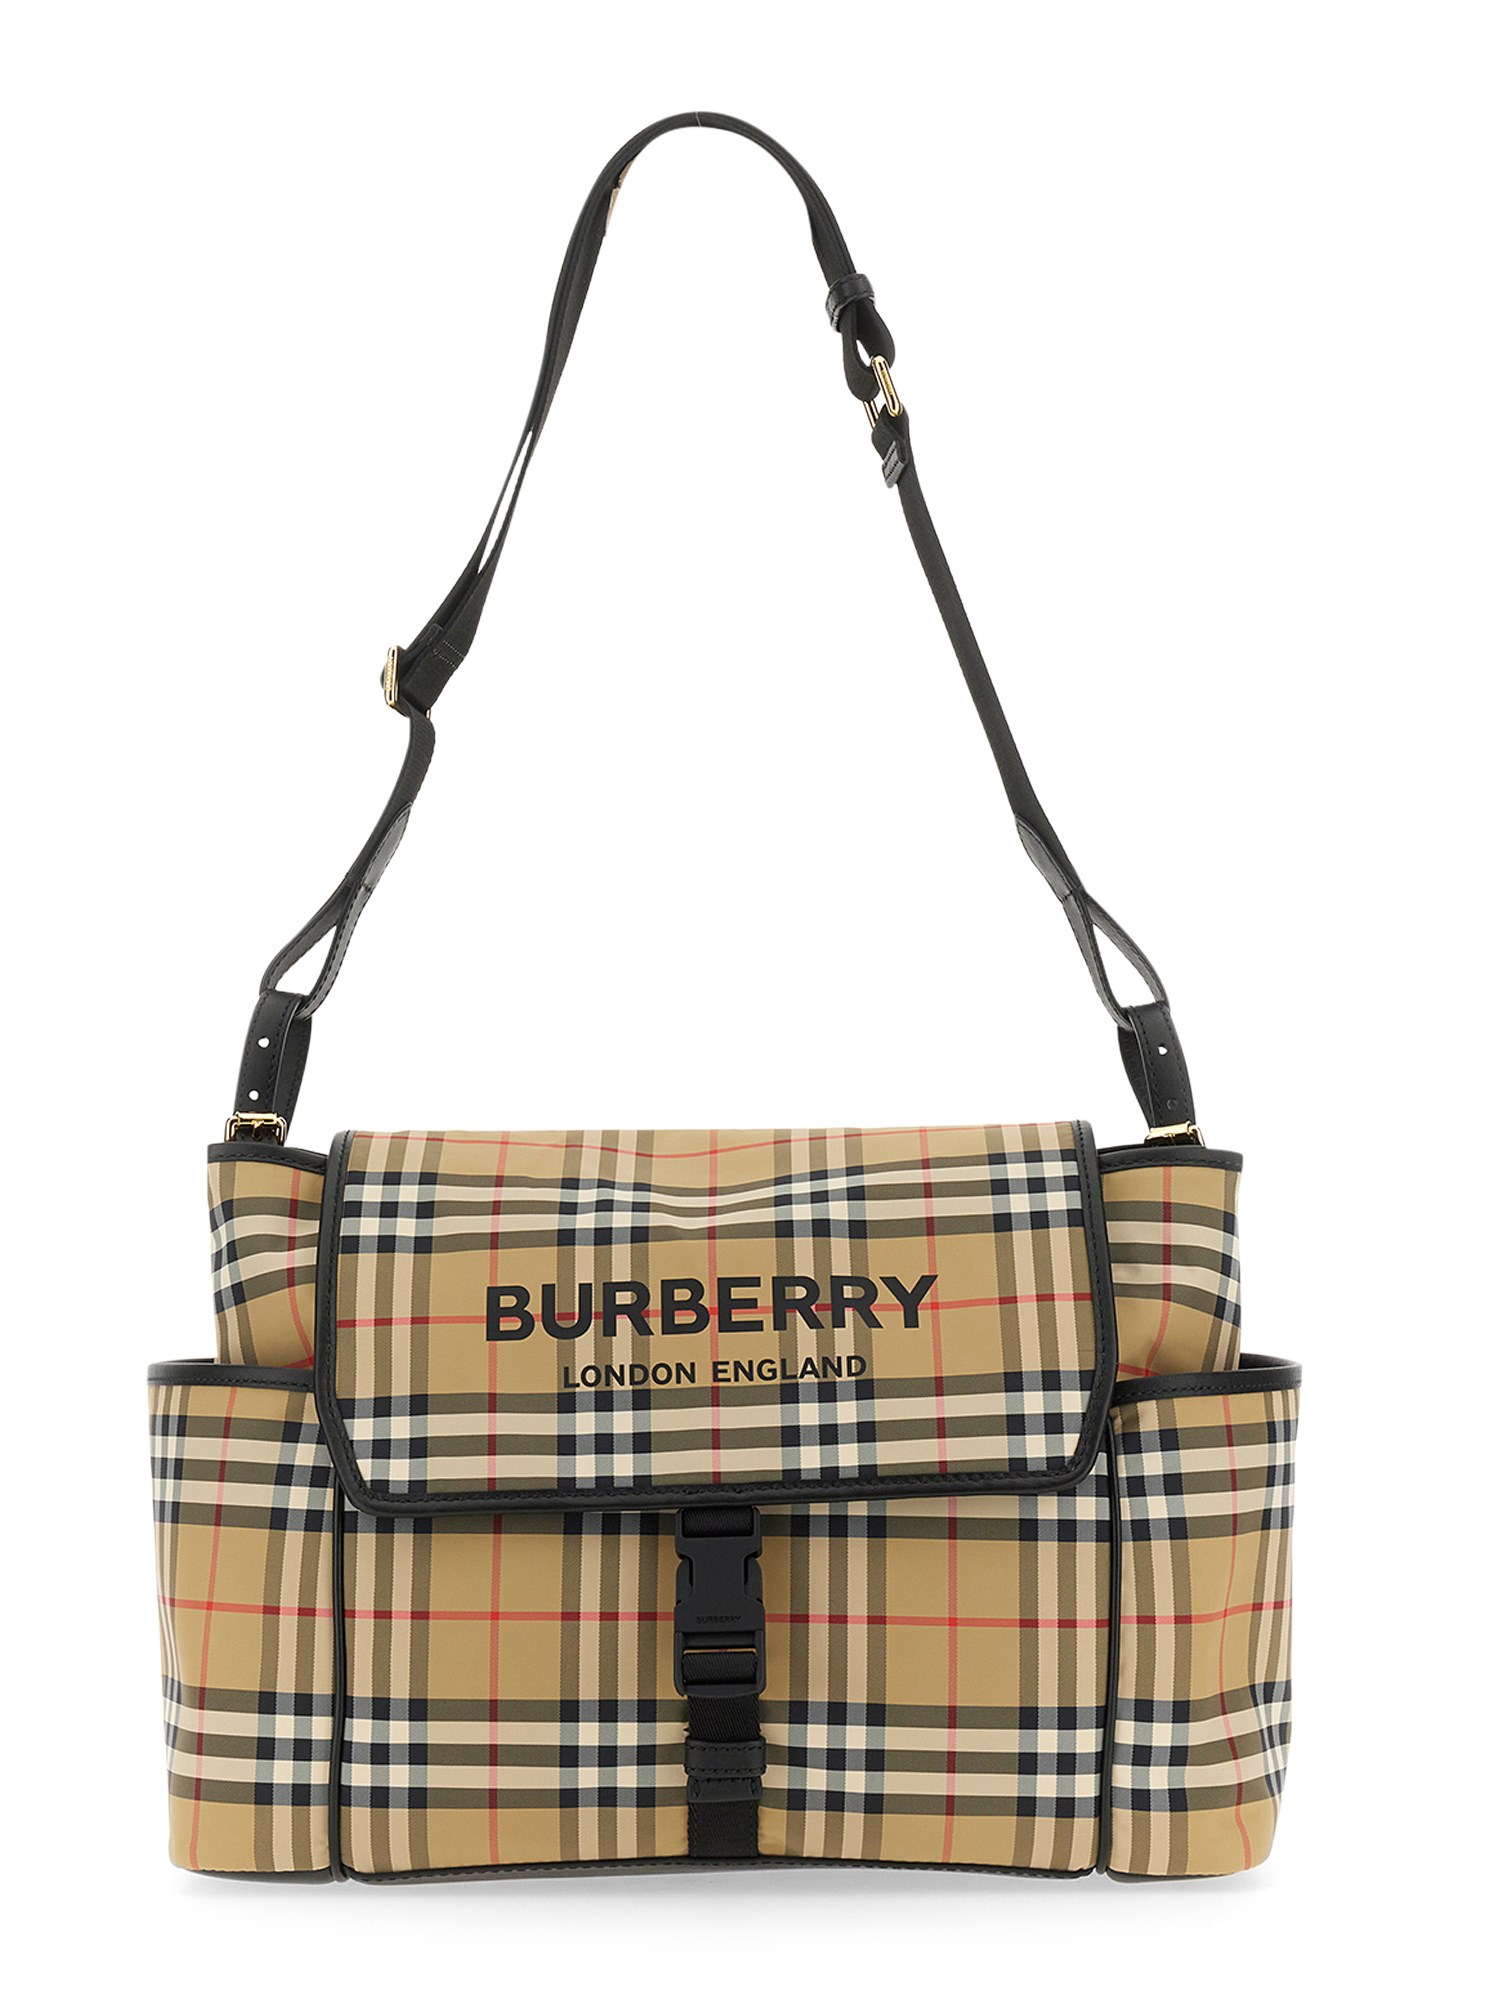 Burberry burberry mummy bag with check pattern